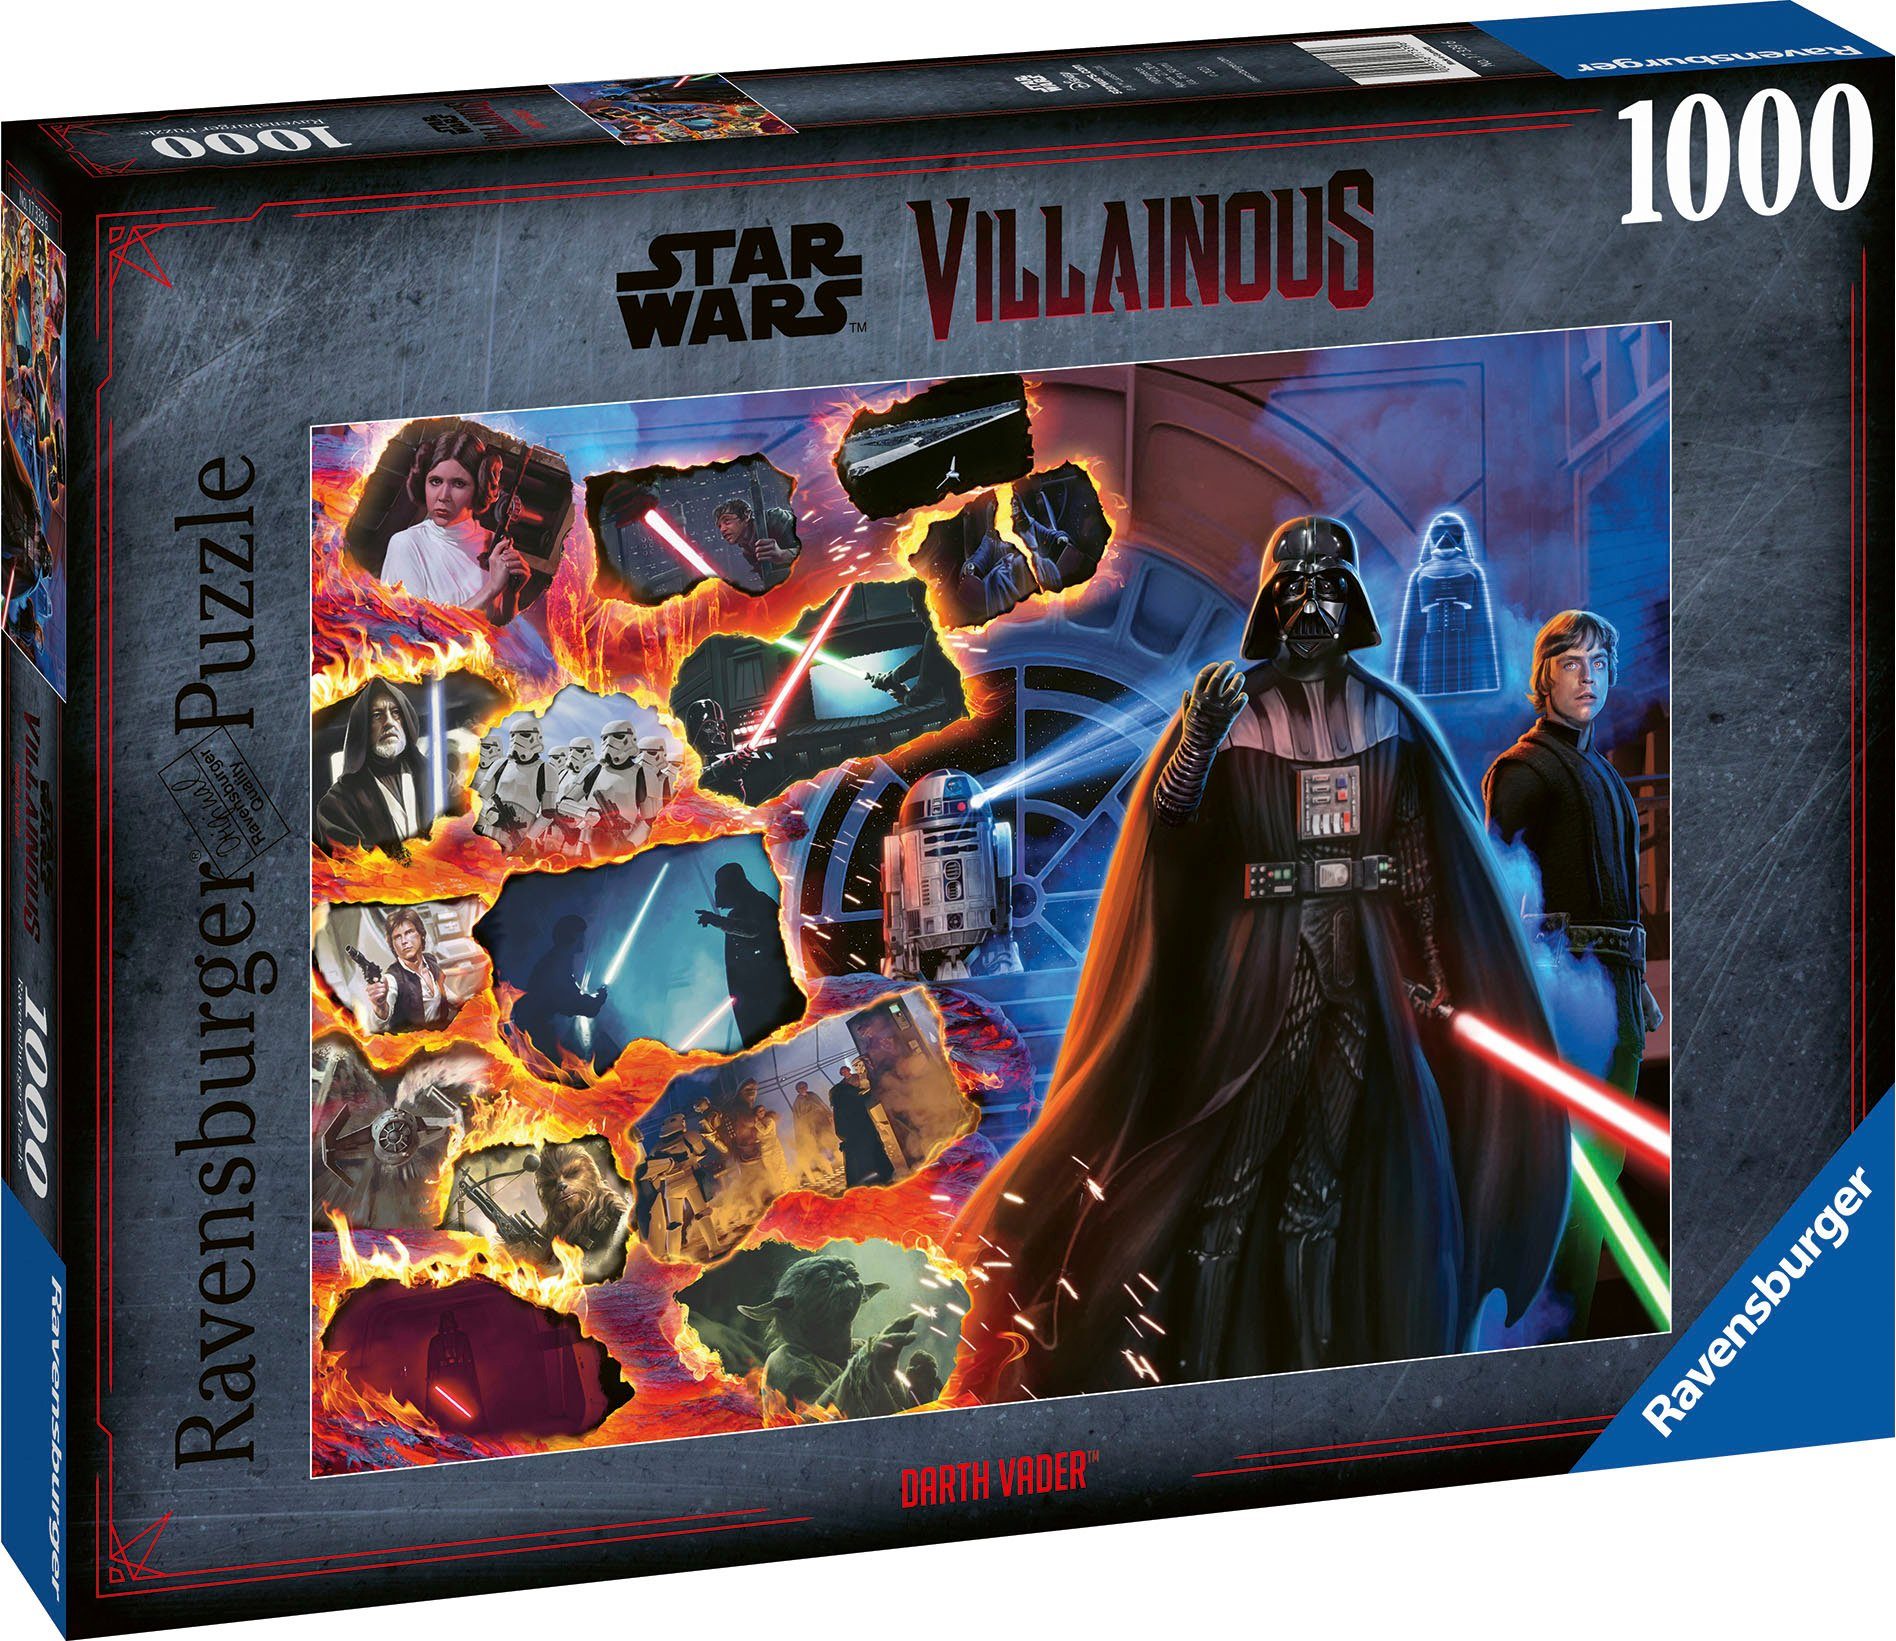 Vader, Villainous, Puzzle Germany in Ravensburger Darth Wars Star Made Puzzleteile, 1000